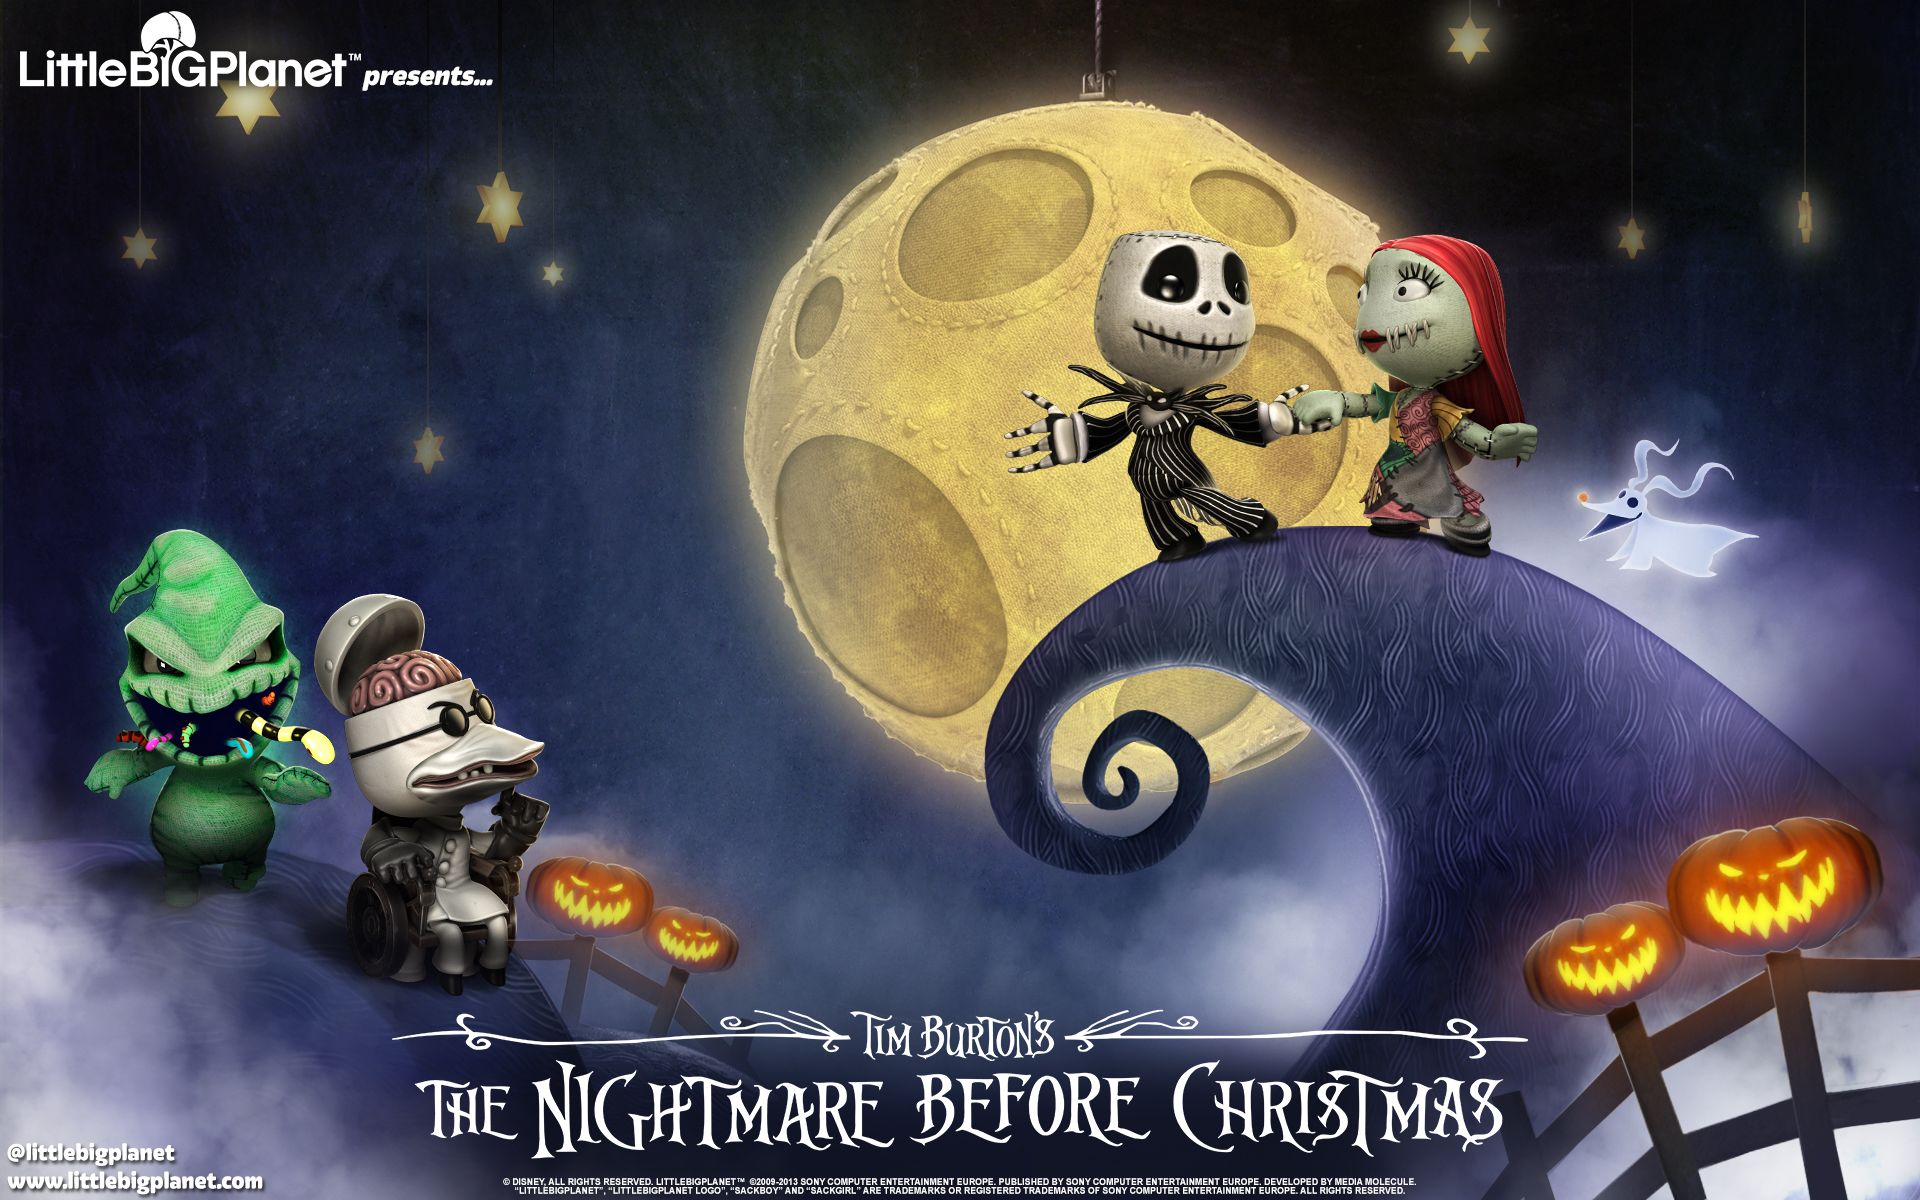 The Nightmare Before Christmas Level Kit is available now!